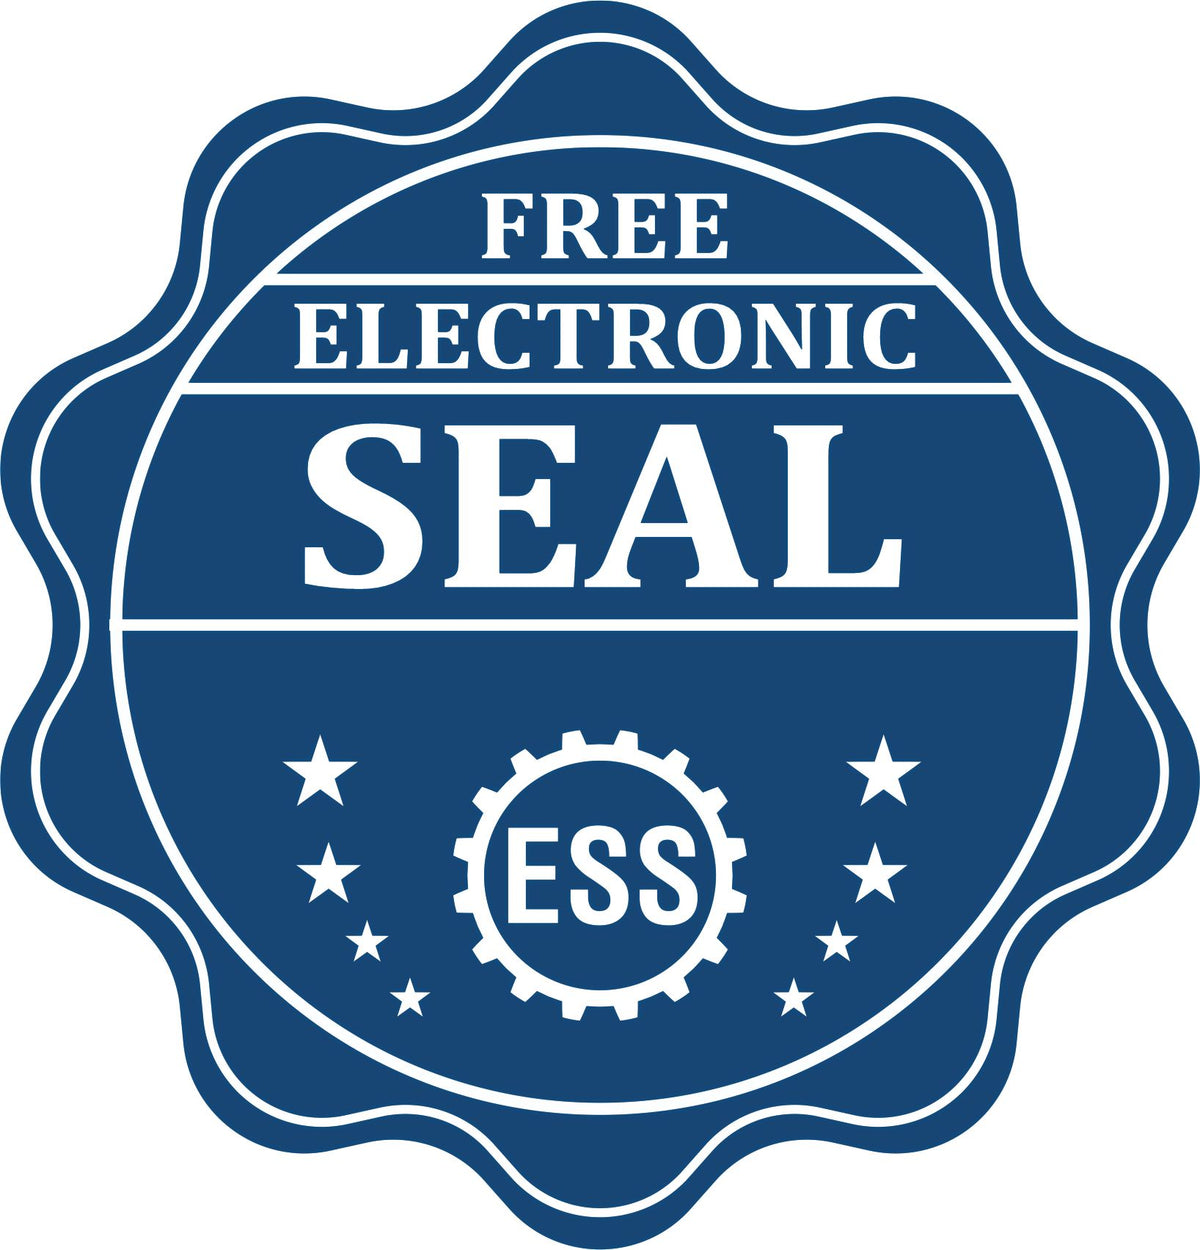 A badge showing a free electronic seal for the Long Reach District of Columbia Geology Seal with stars and the ESS gear on the emblem.